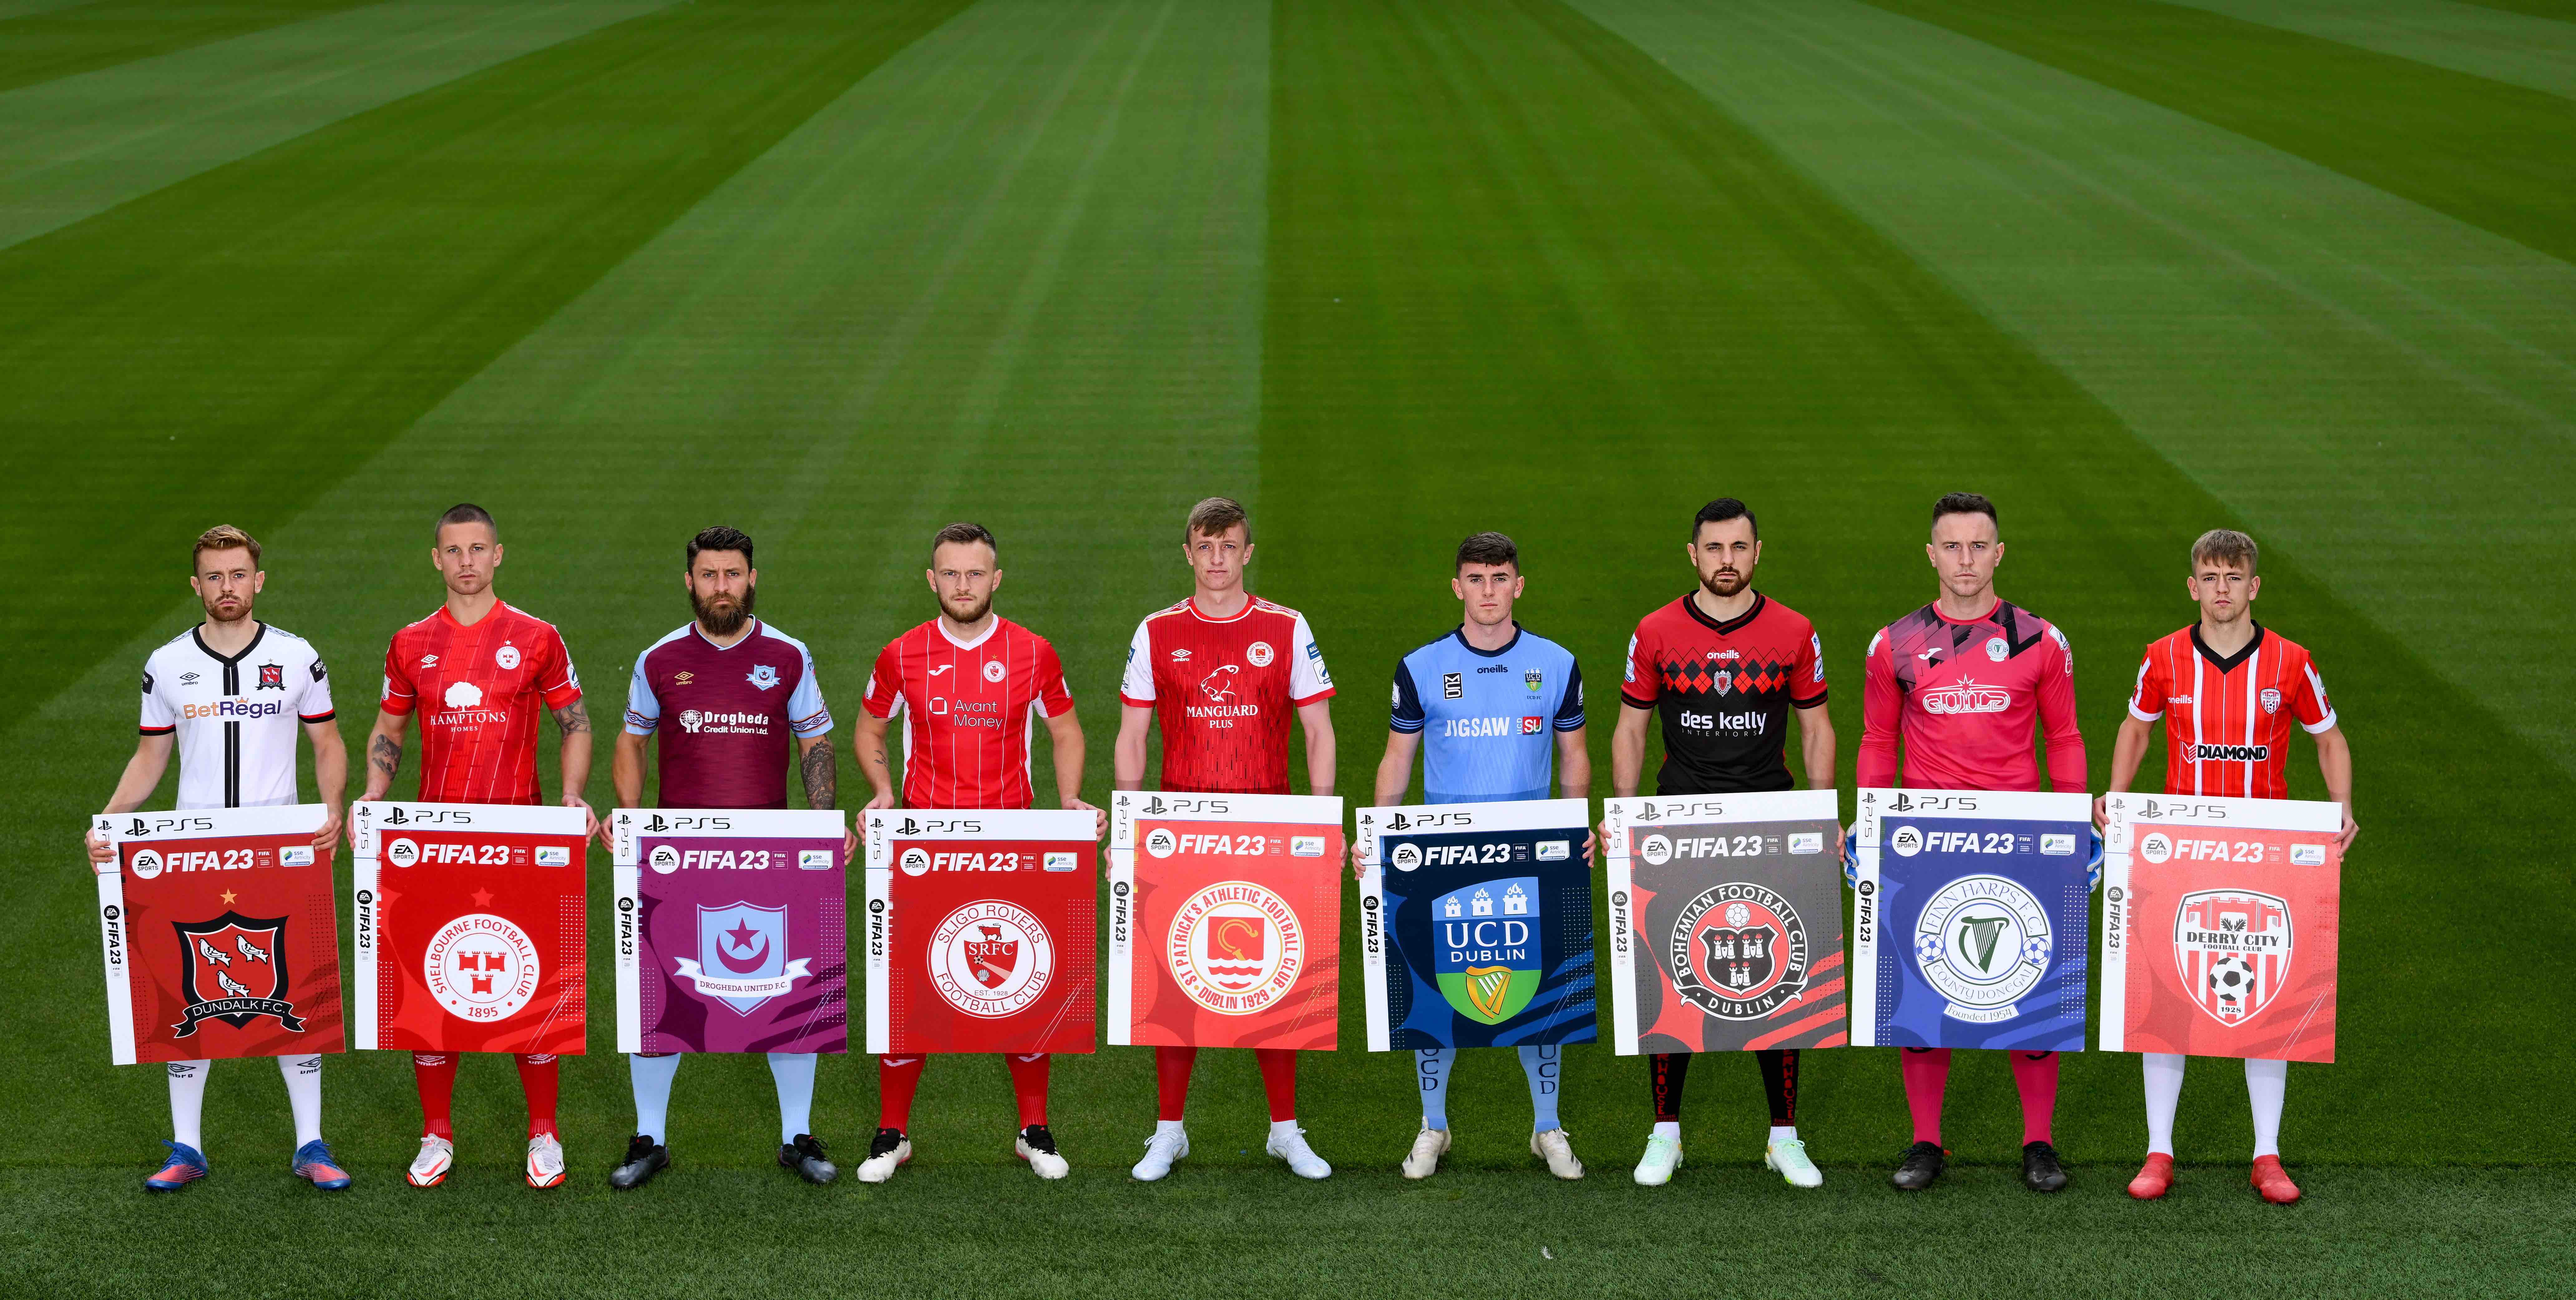 RETURN OF THE PACKS!  EA SPORTS Announce The Return of the SSE Airtricity League Club Packs in FIFA 23